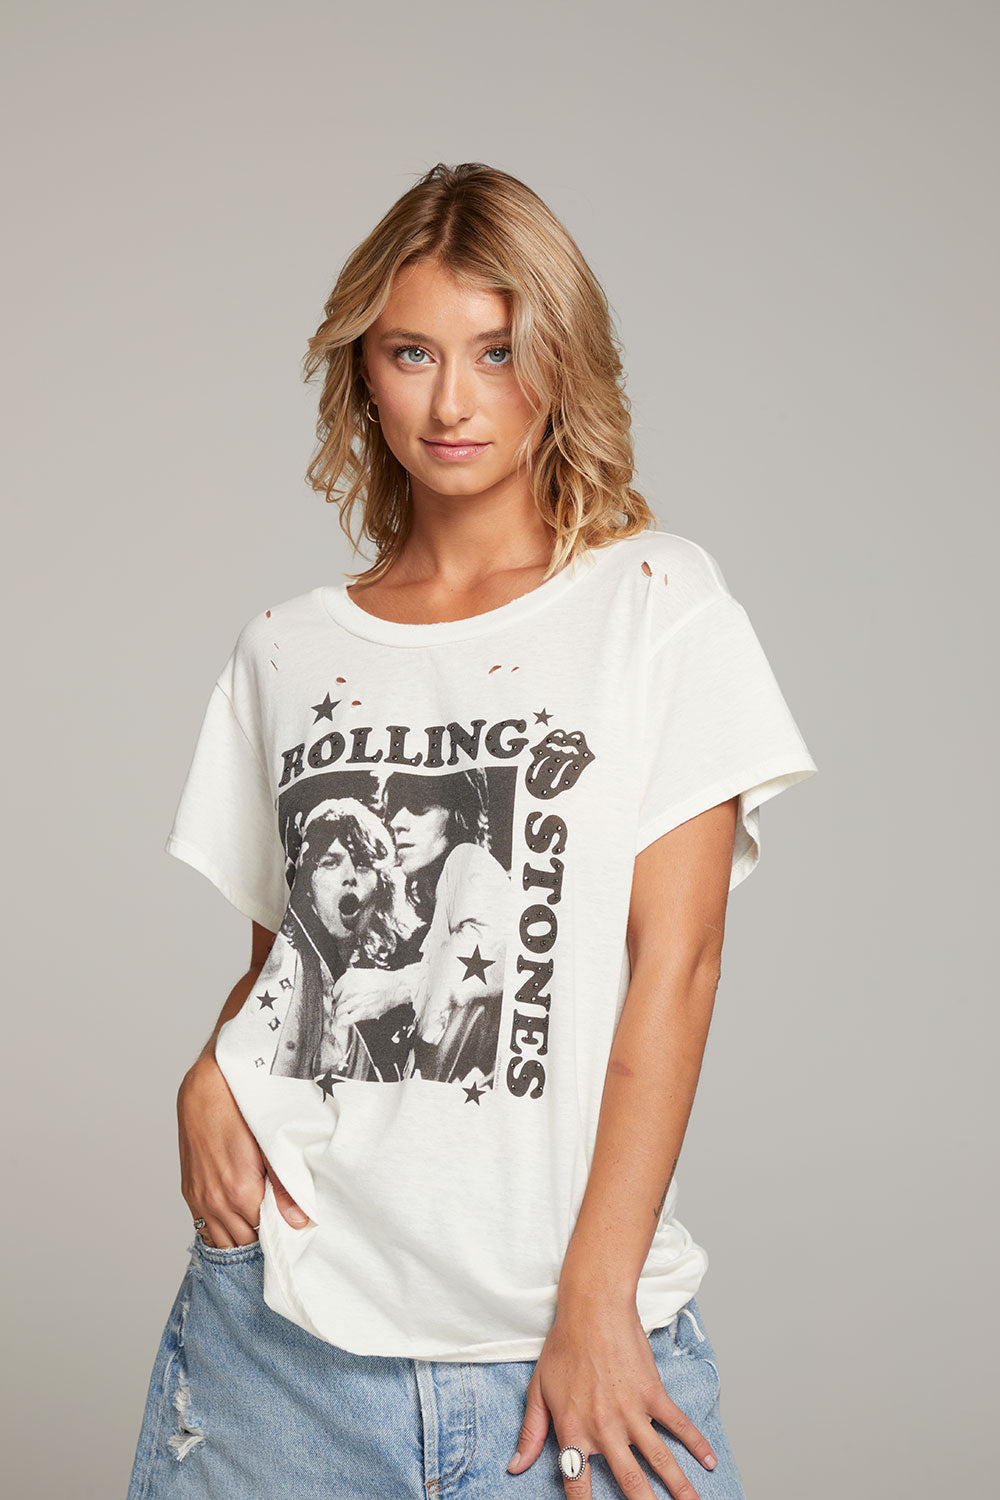 Rolling Stones Mick &amp; Keith Tee WOMENS chaserbrand